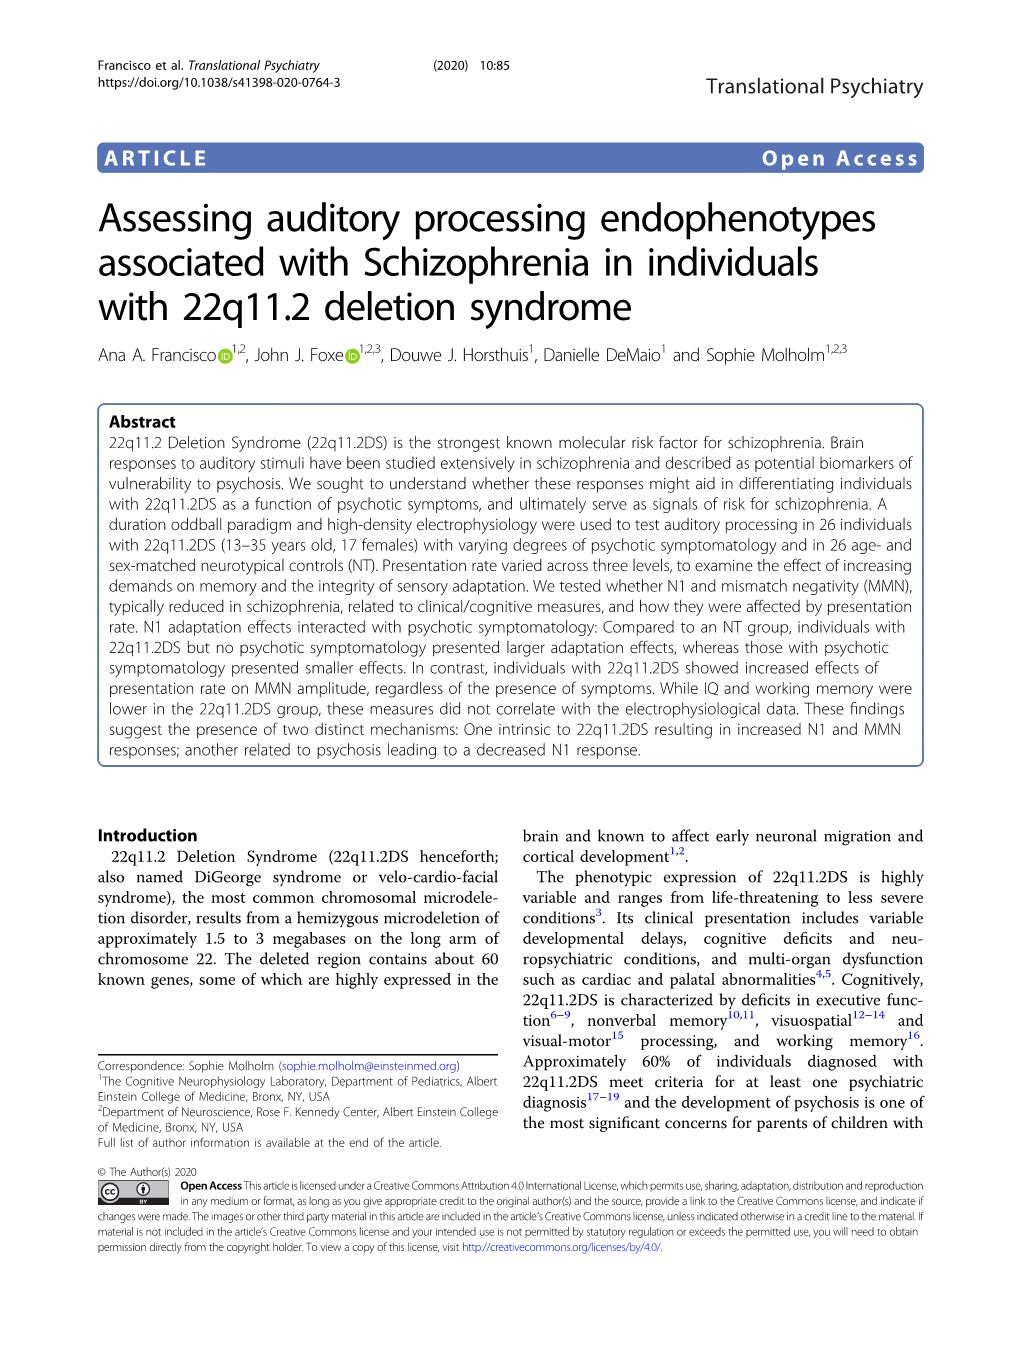 Assessing Auditory Processing Endophenotypes Associated with Schizophrenia in Individuals with 22Q11.2 Deletion Syndrome Ana A